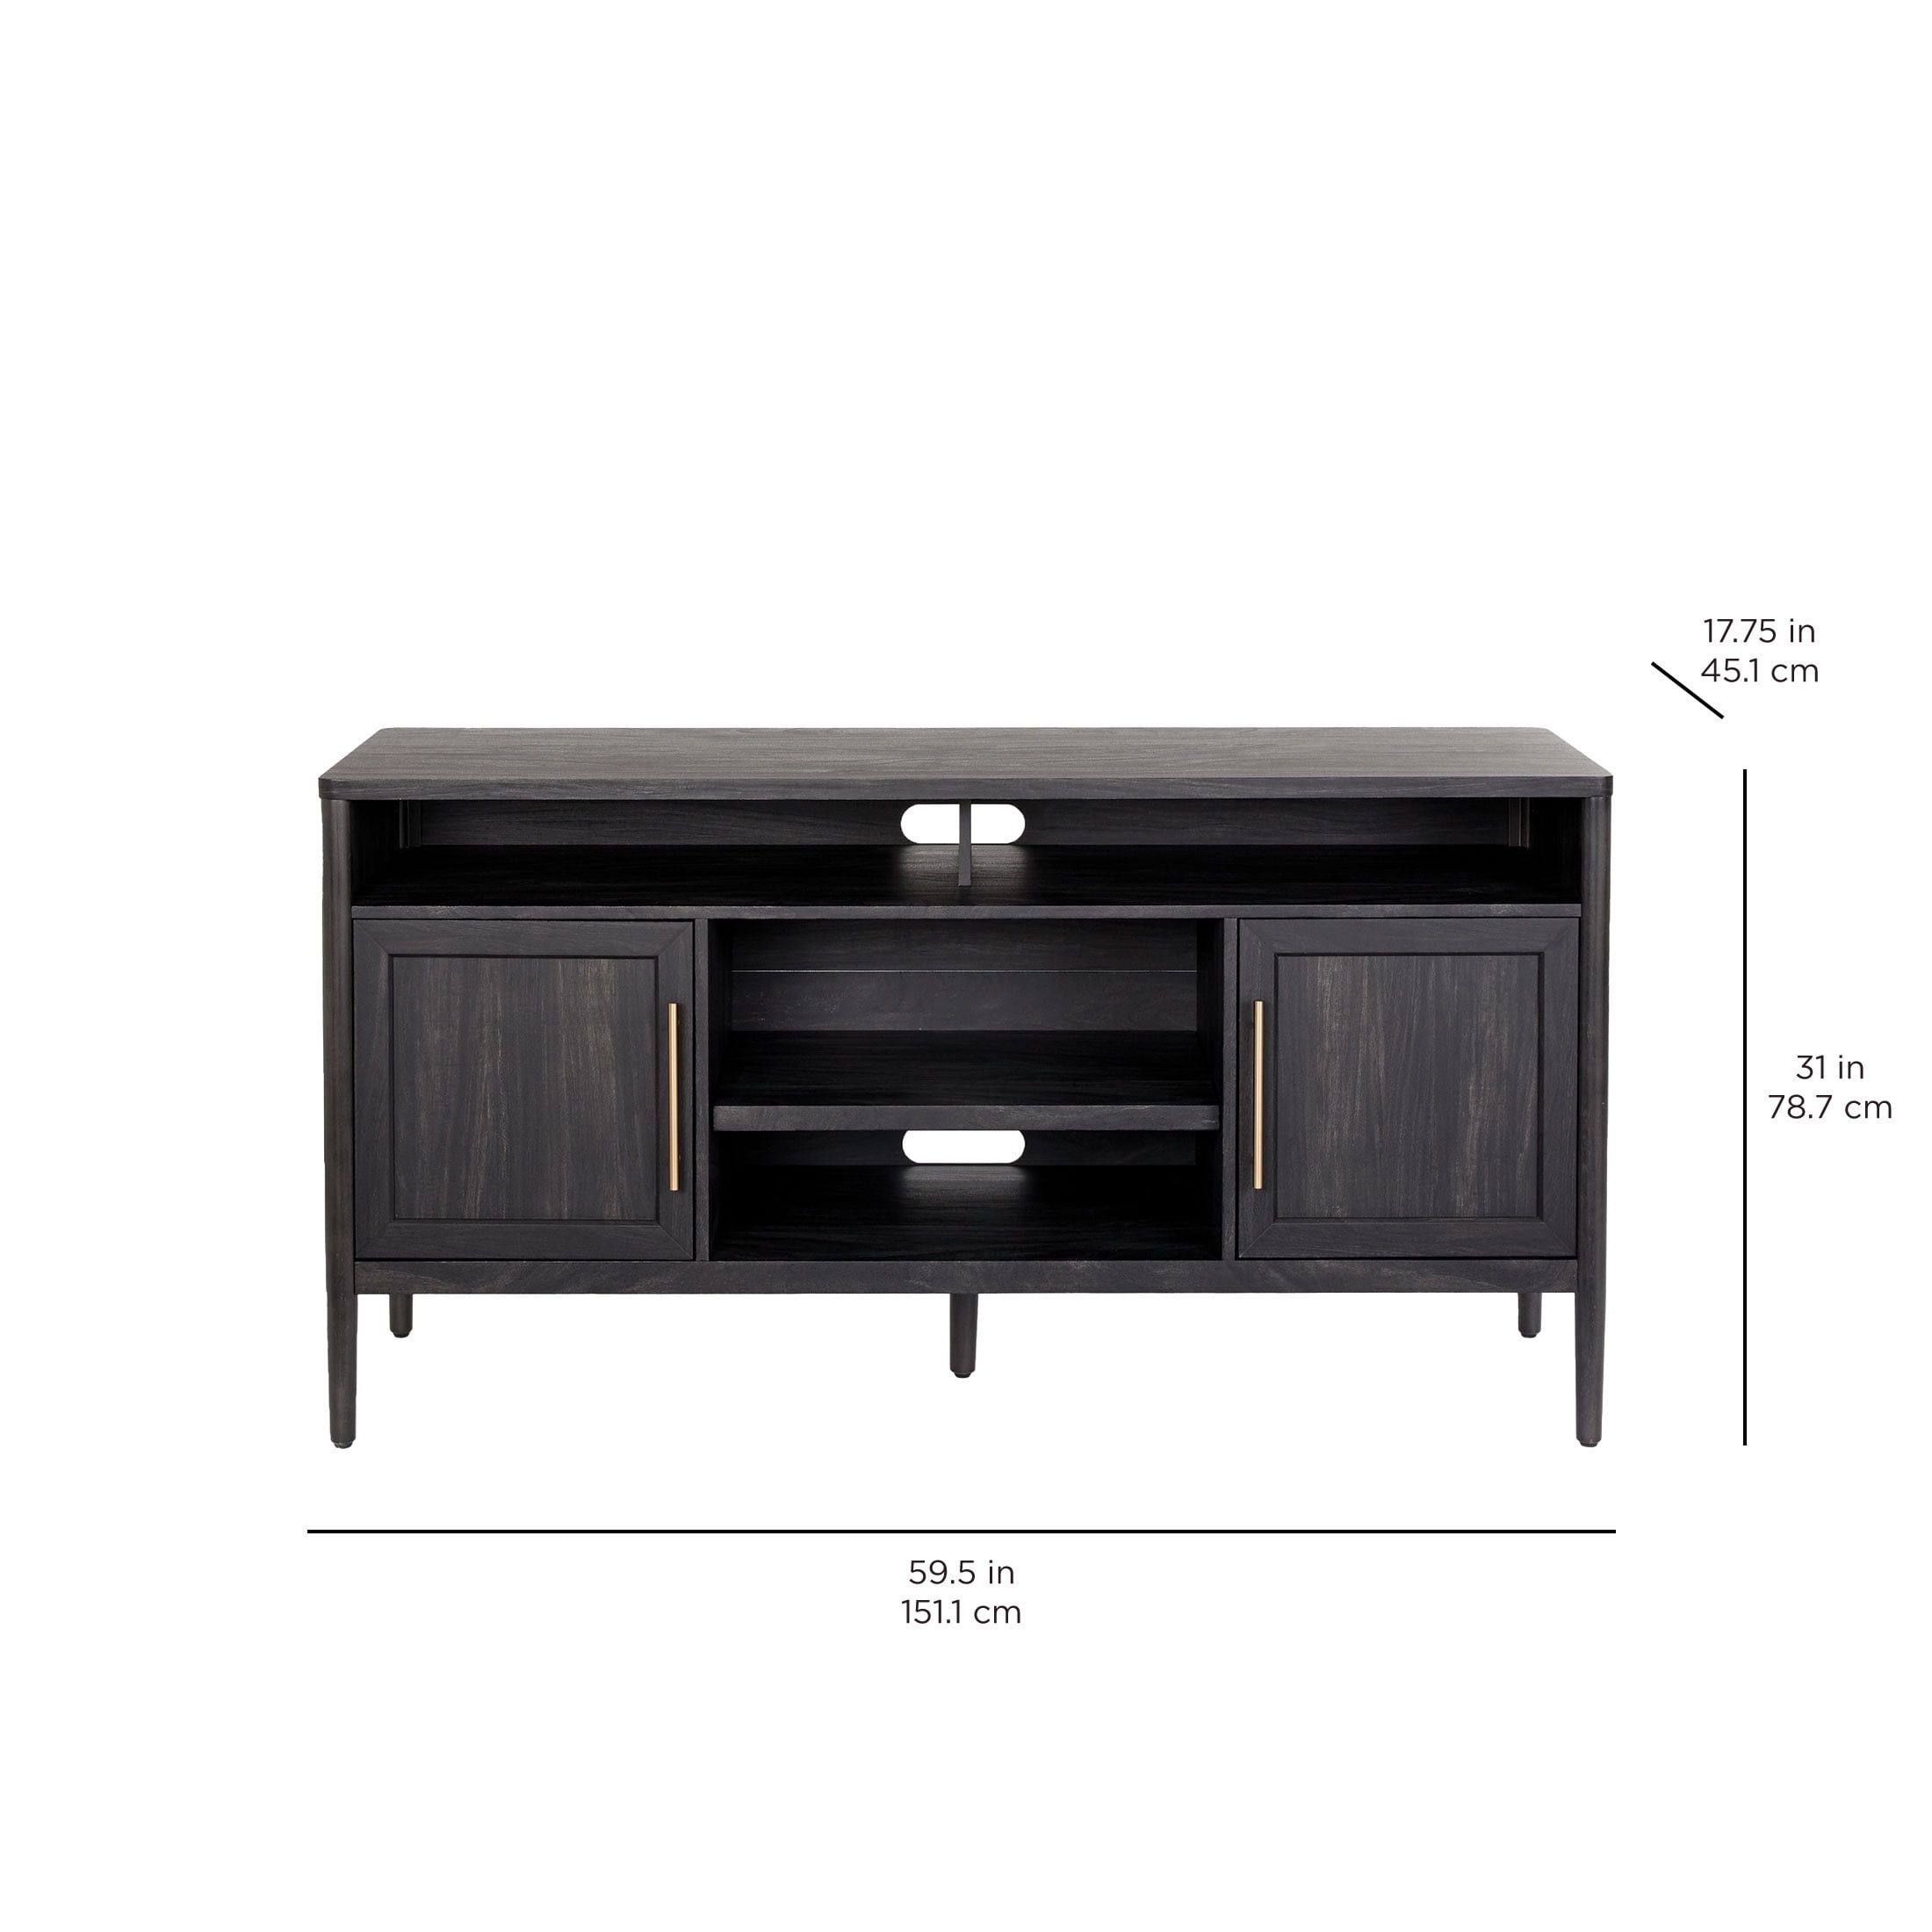 Better Homes & Gardens Oaklee Tv Stand For Tvs Up To 70”, Charcoal Throughout Oaklee Tv Stands (Gallery 18 of 20)